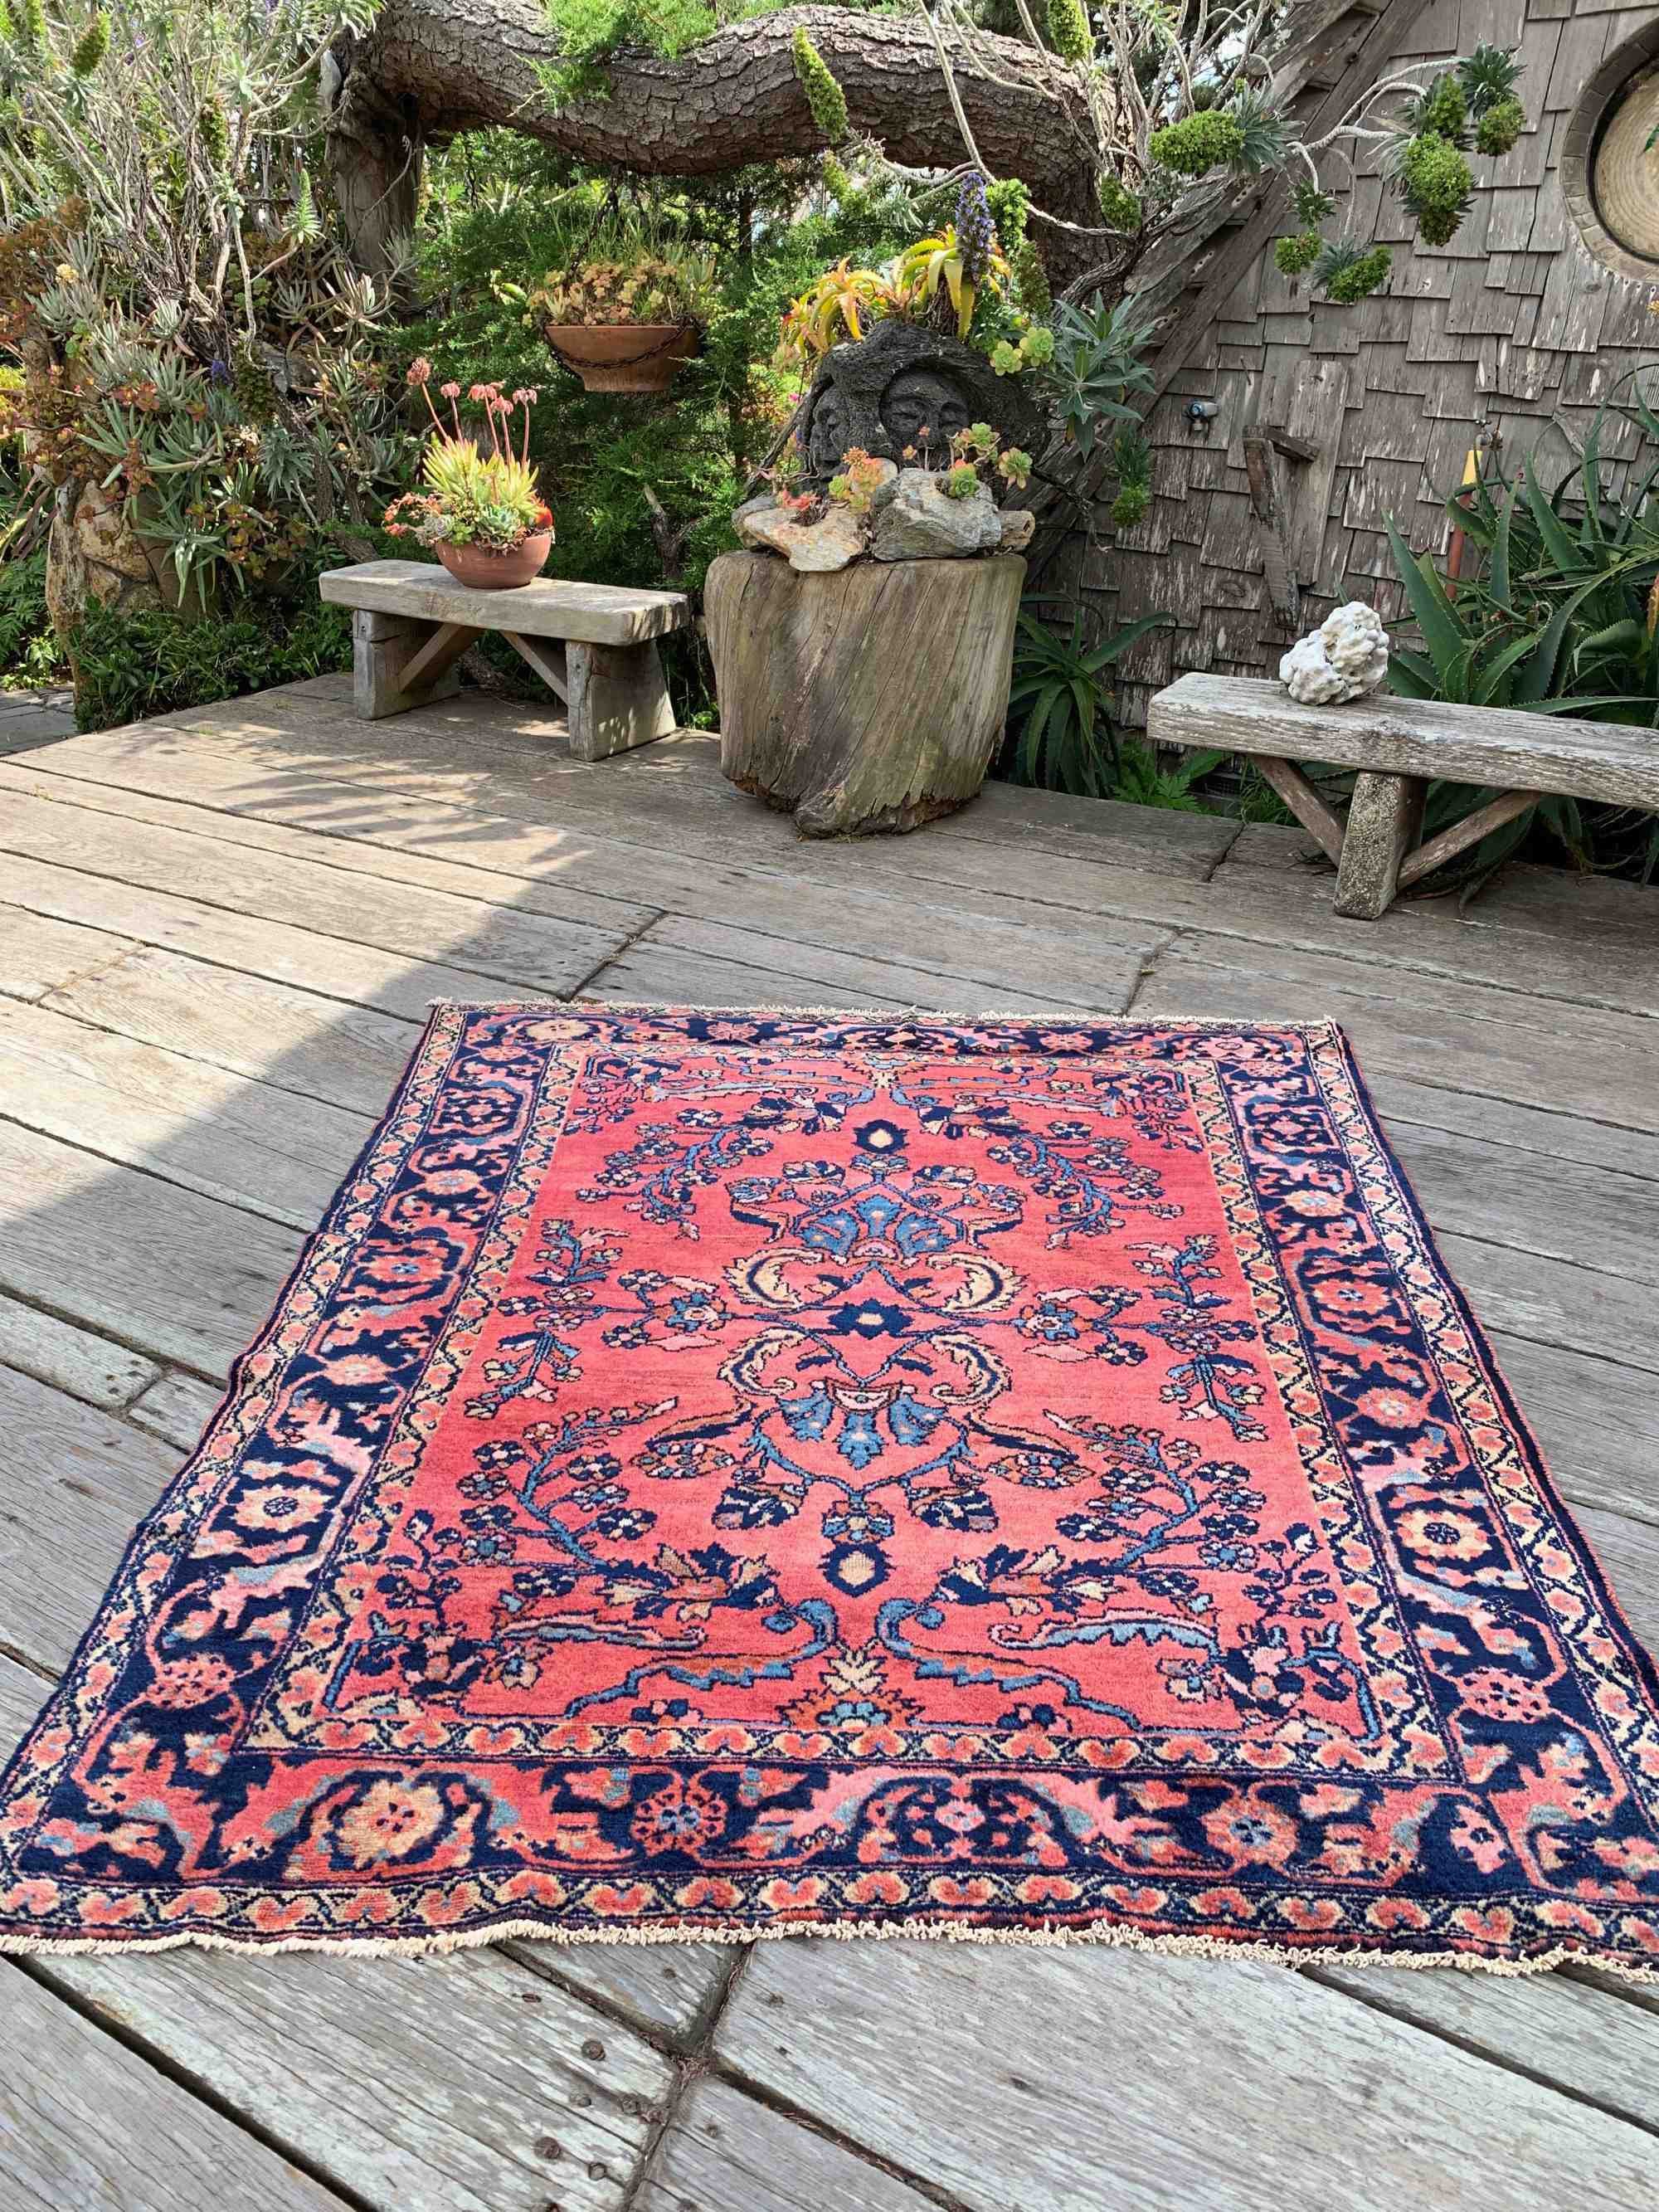 Lena, Antique Lilian scatter rug, 4'11 x 6'4 – Sapere Collection